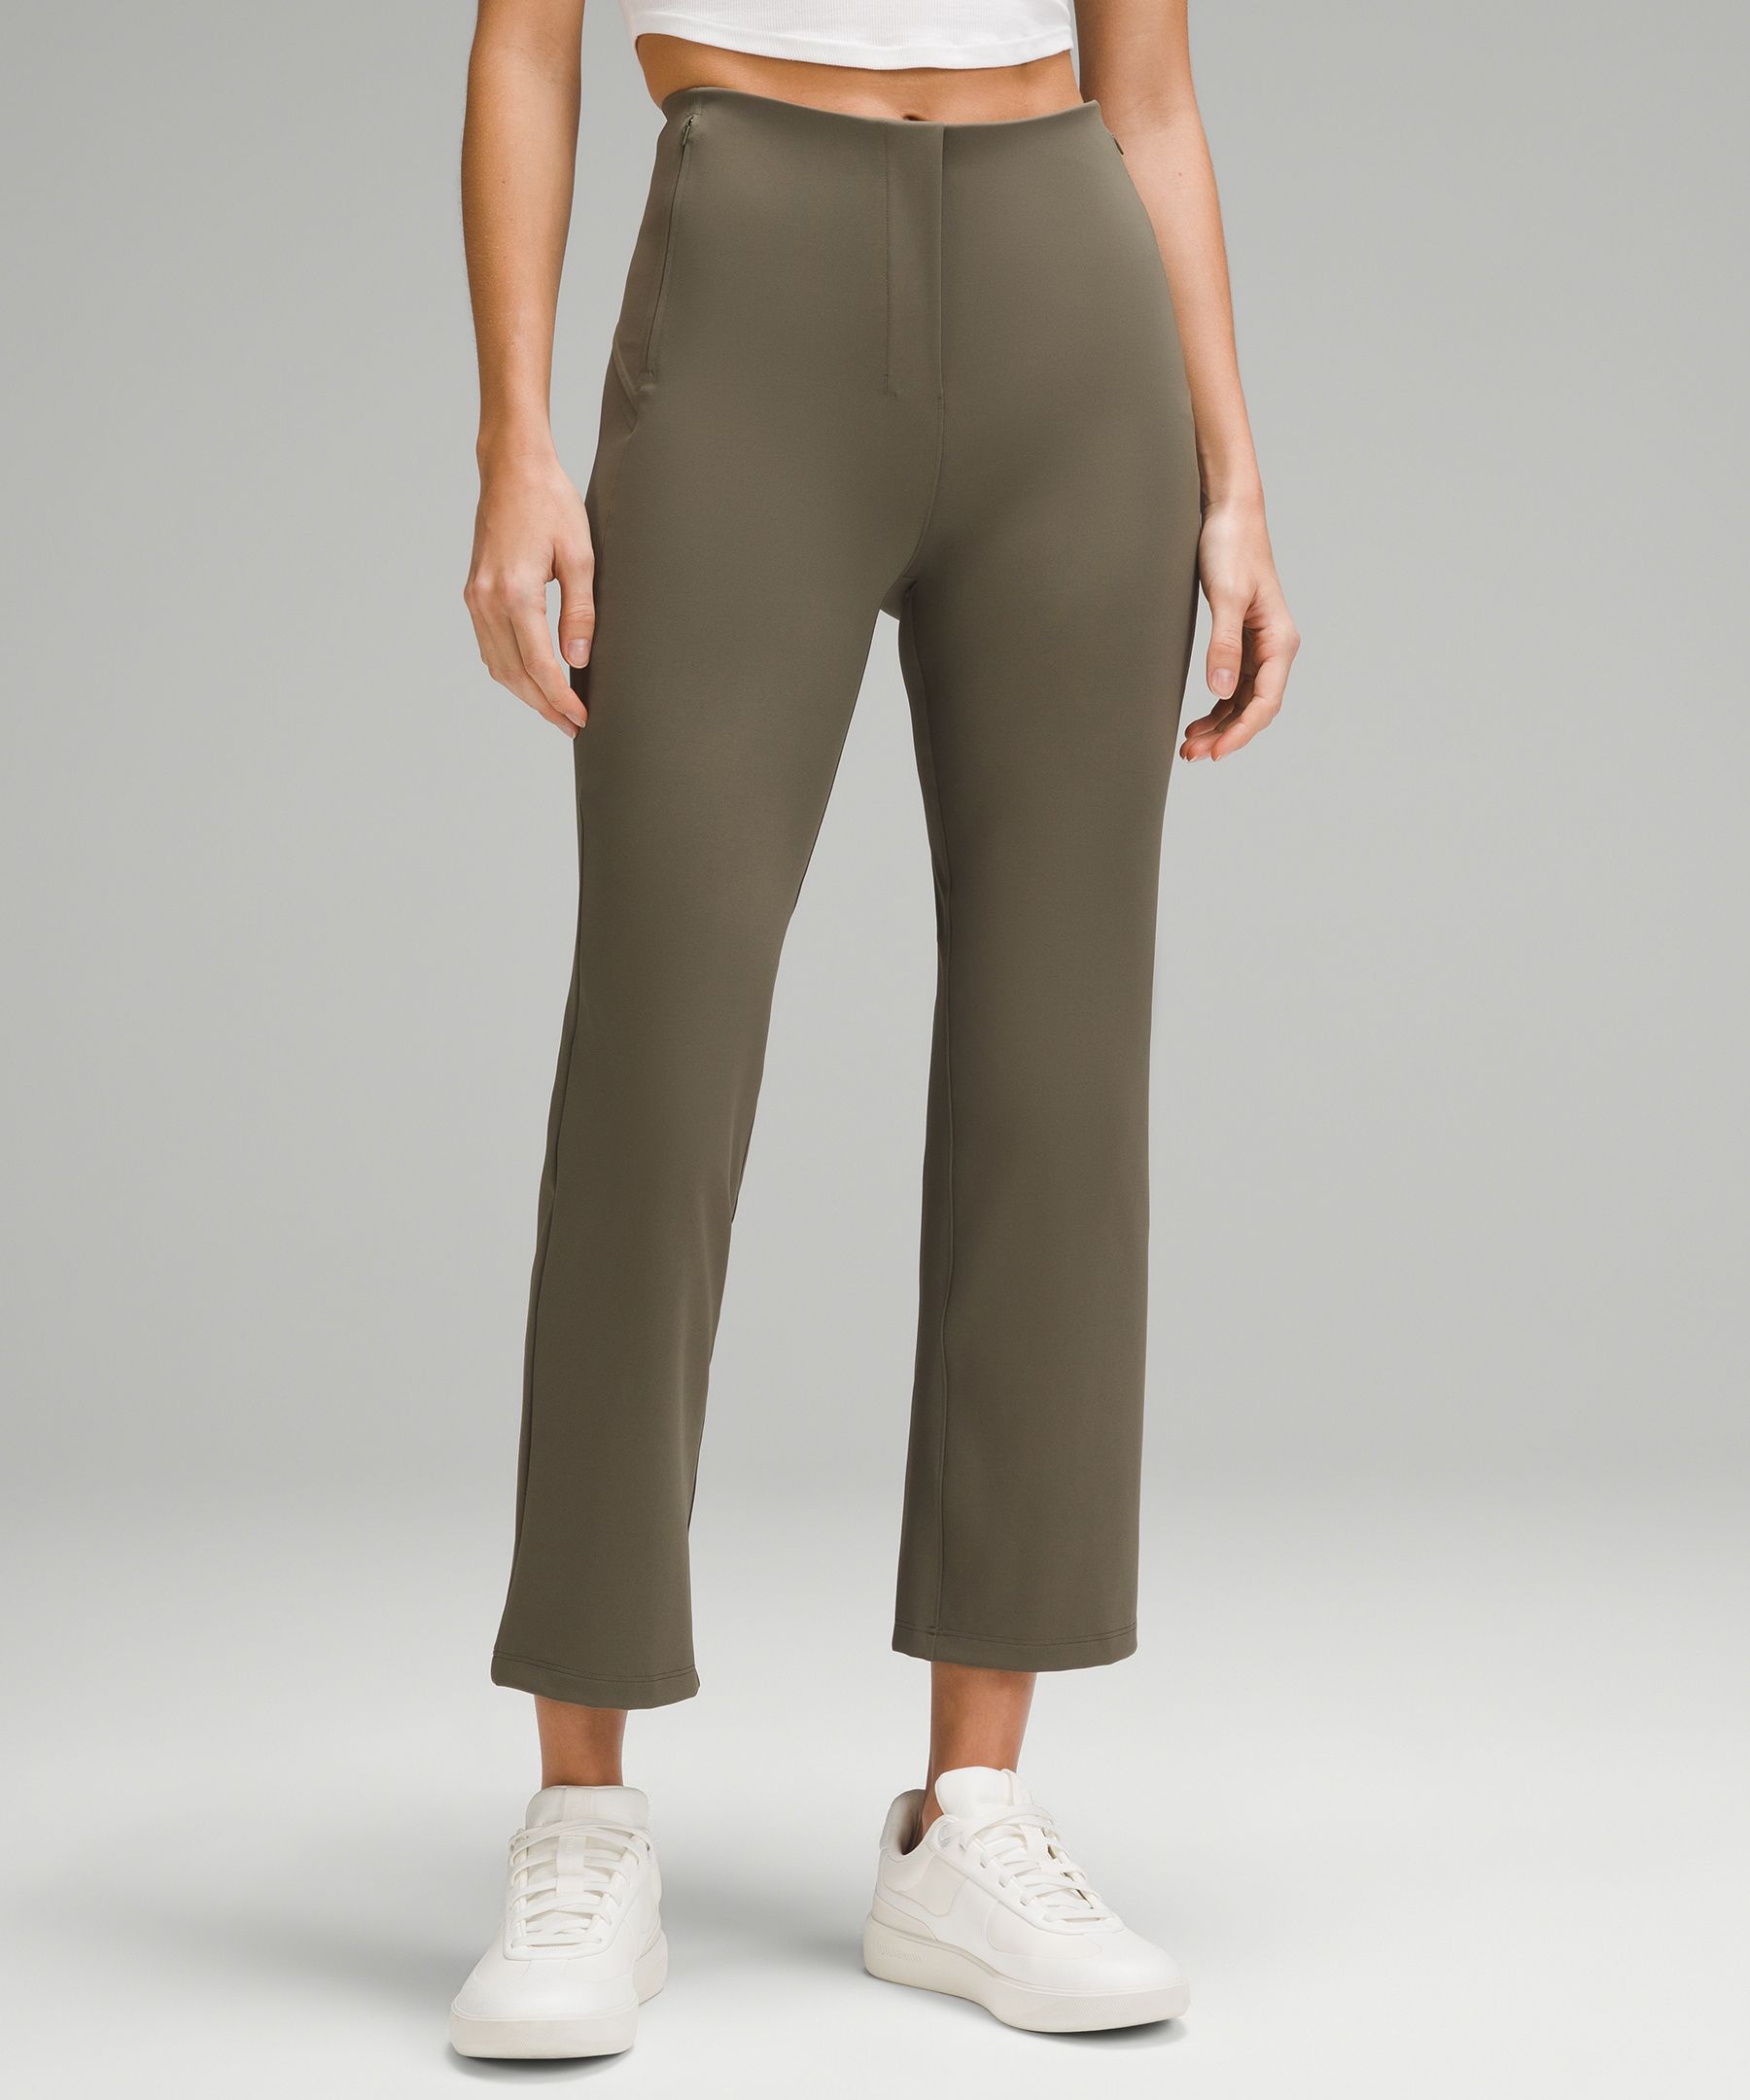 Womens Soft Surroundings Pants  The Ultimate Denim Pull-On Crop Olive ~  Gail Short Writes